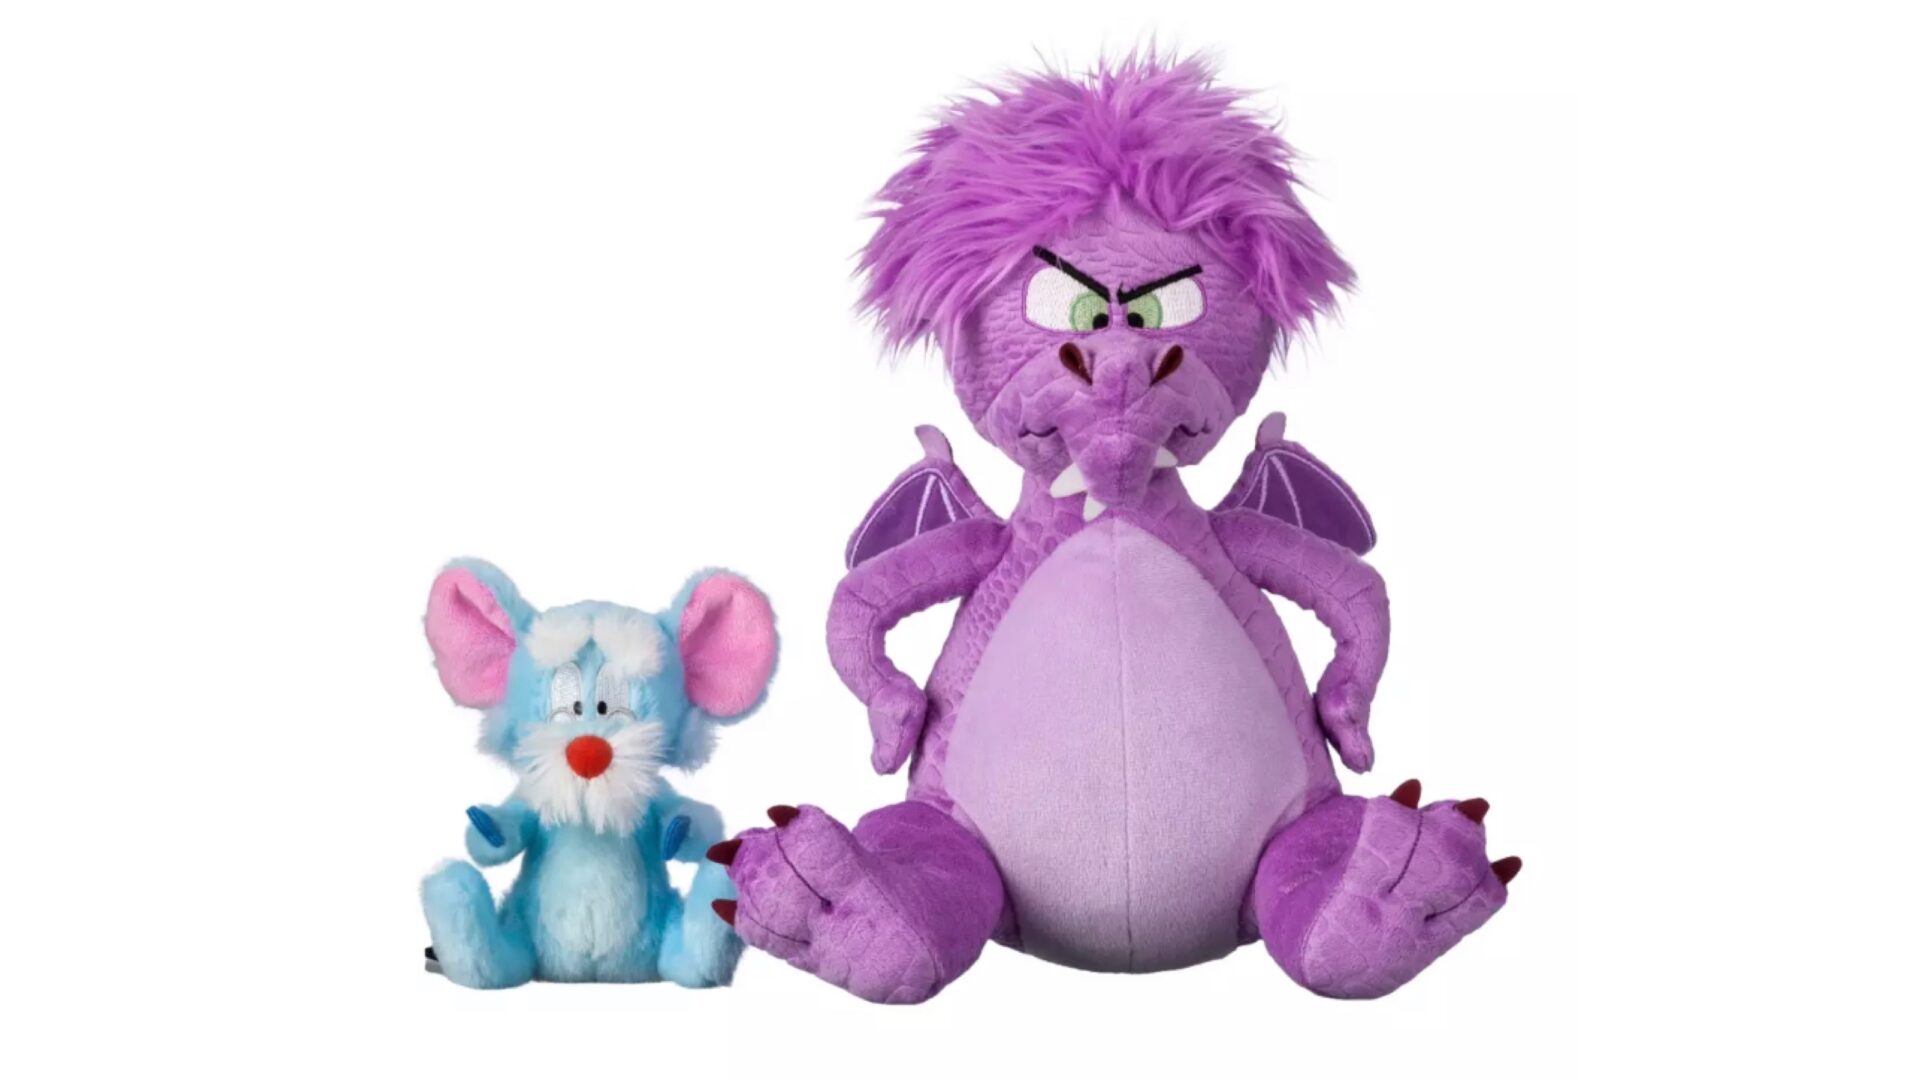 New Disney100 Merlin and Mad Madam Mim Plush Set You Need In Your Collection!